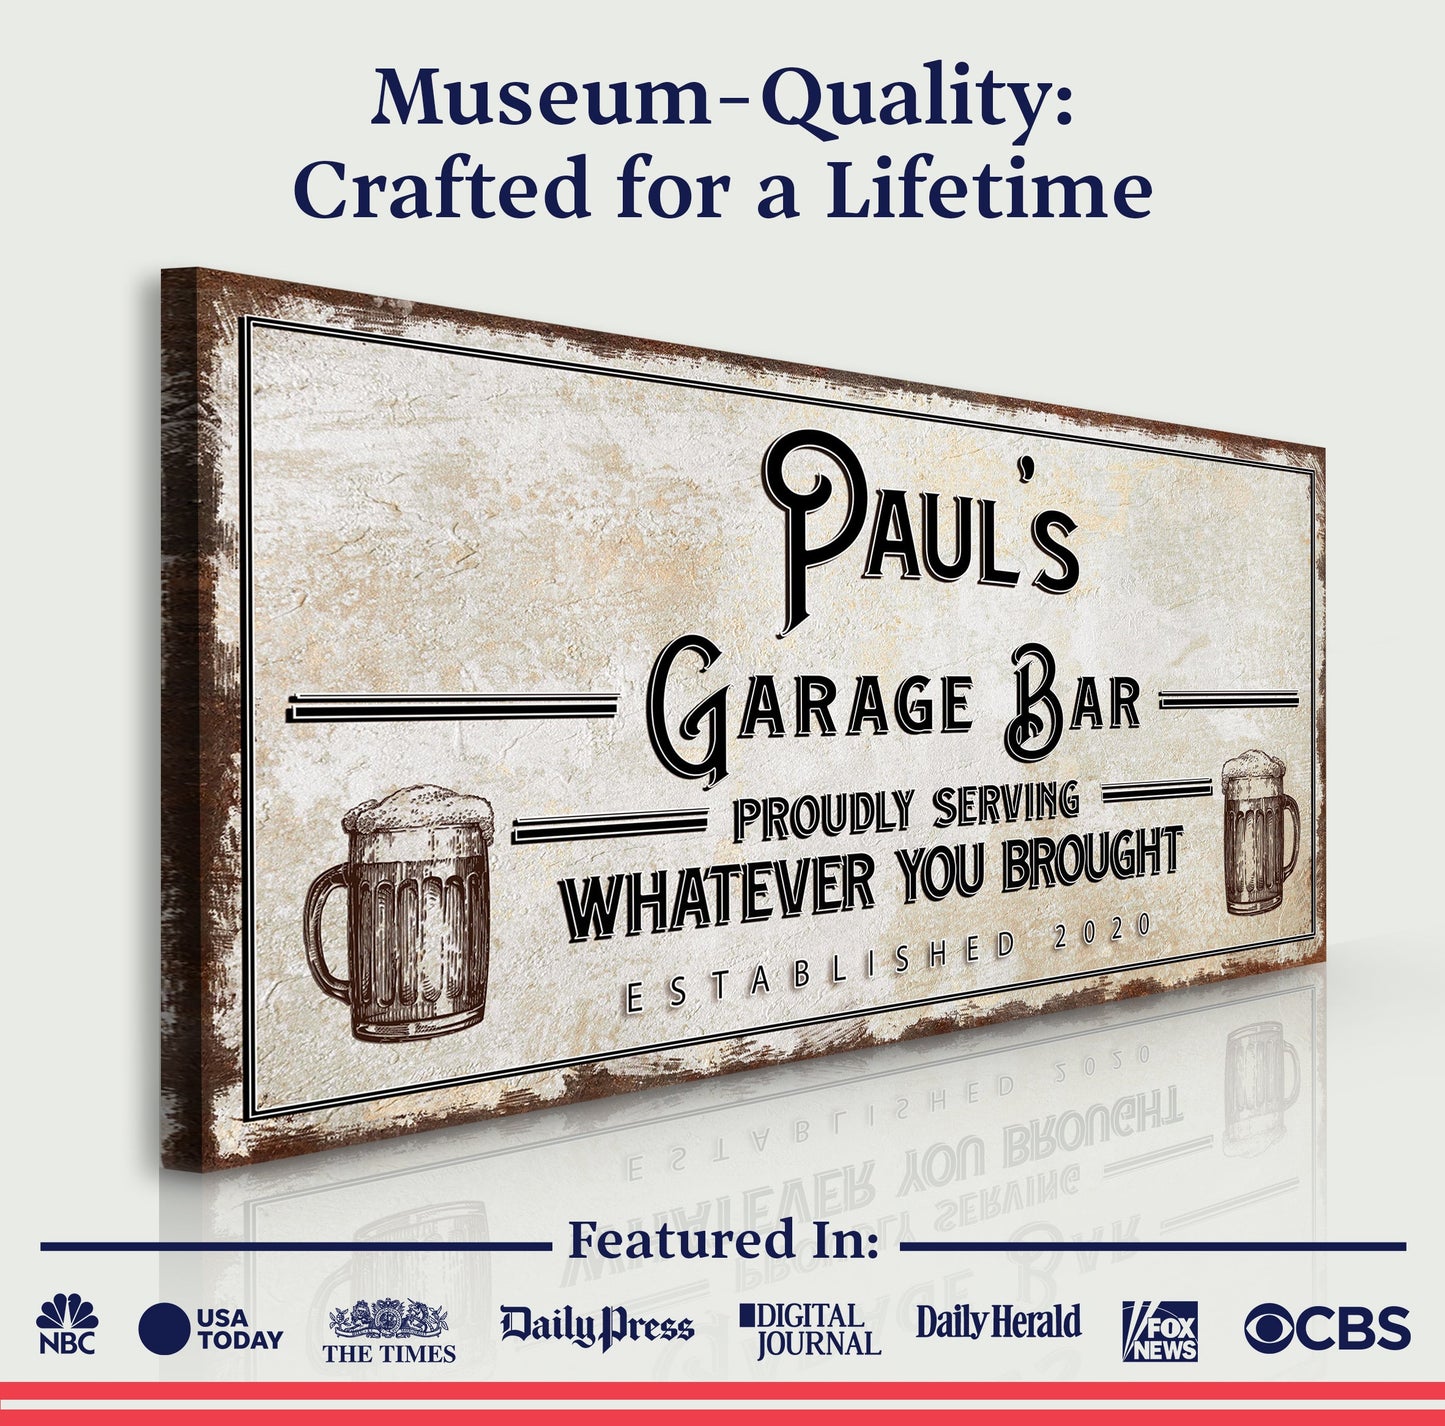 Personalized Rustic Garage Sign for Home Bar: Enhance Your Man Cave Wall Decor with Personalized Basement Bar Sign